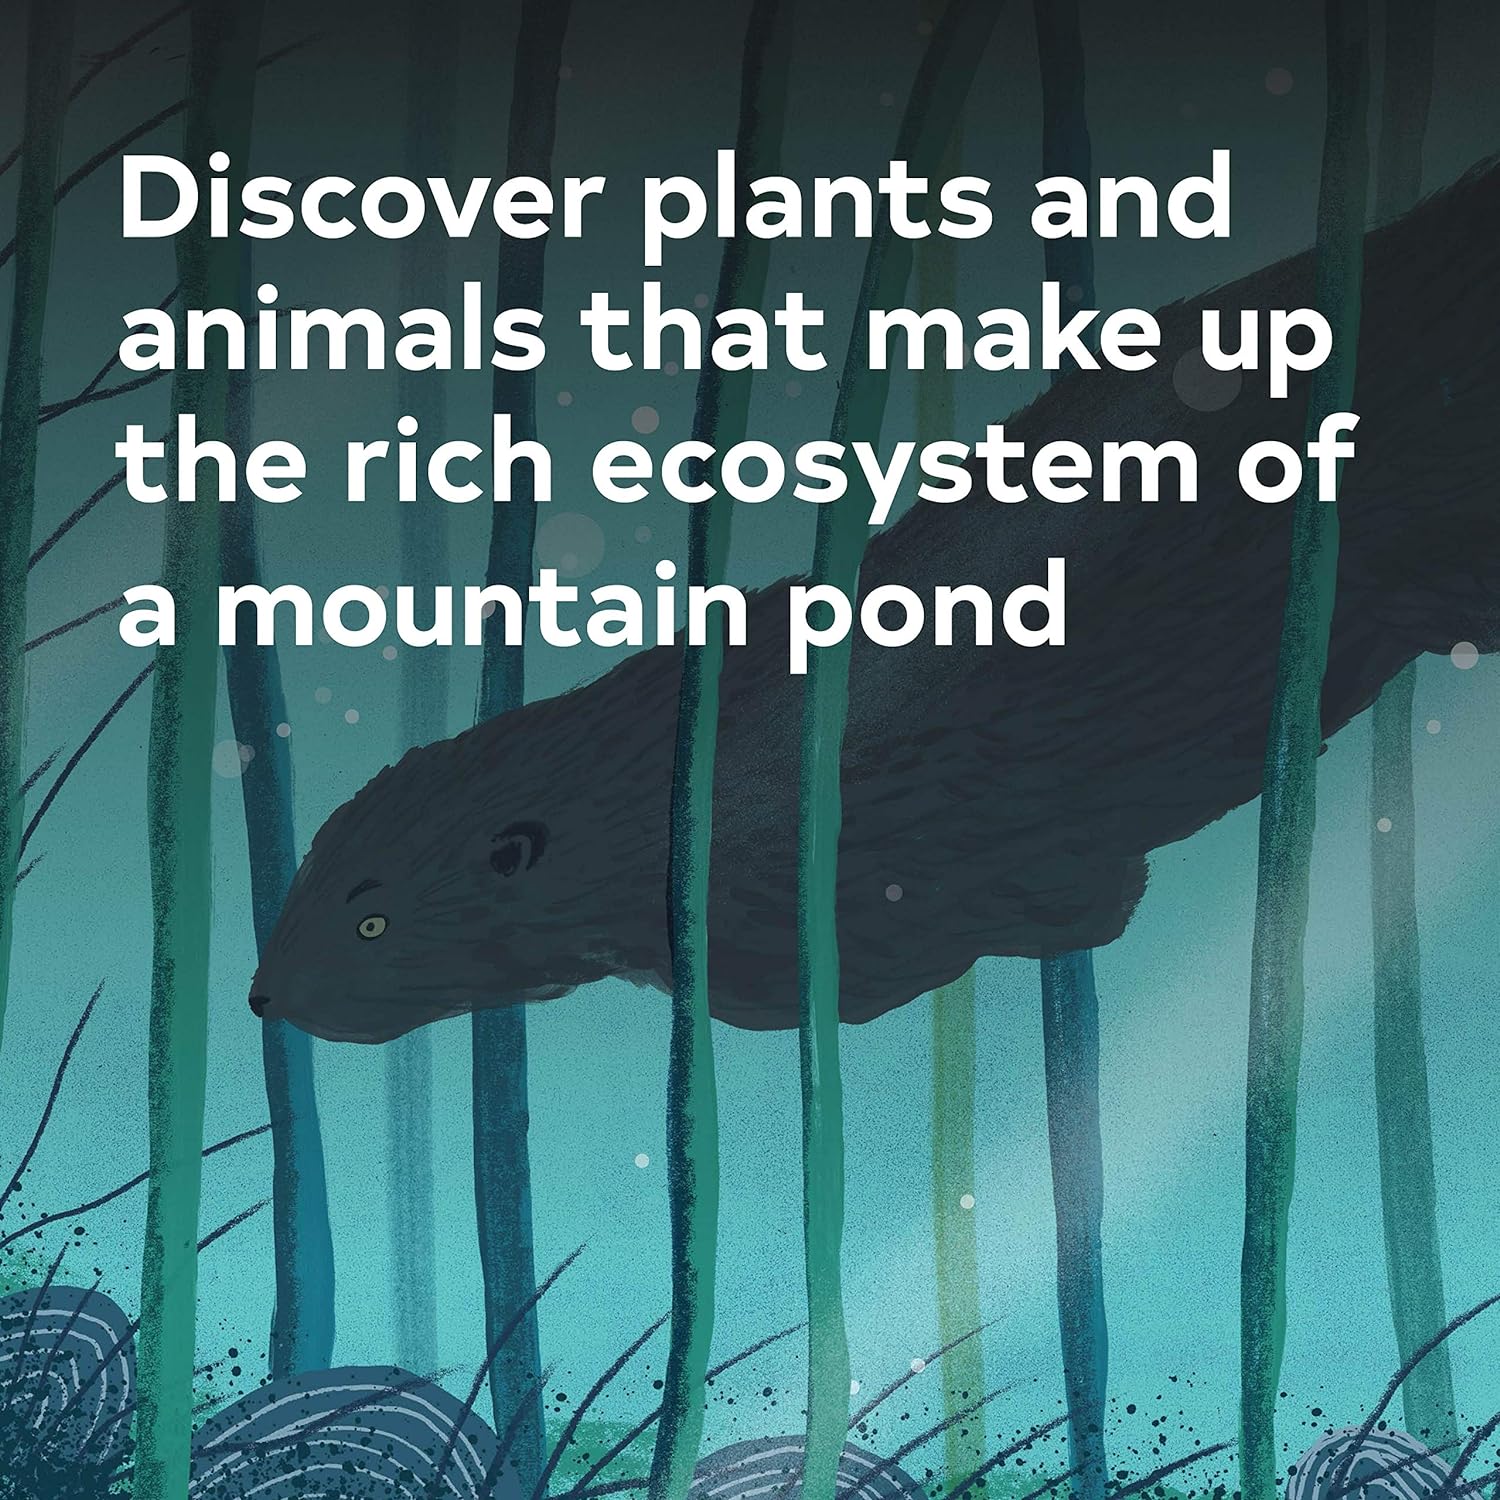 Kate Messner and Christopher Silas Neal bring to life a secret underwater world in this book. Readers will discover the plants and animals that make up the rich, interconnected ecosystem of a mountain pond.